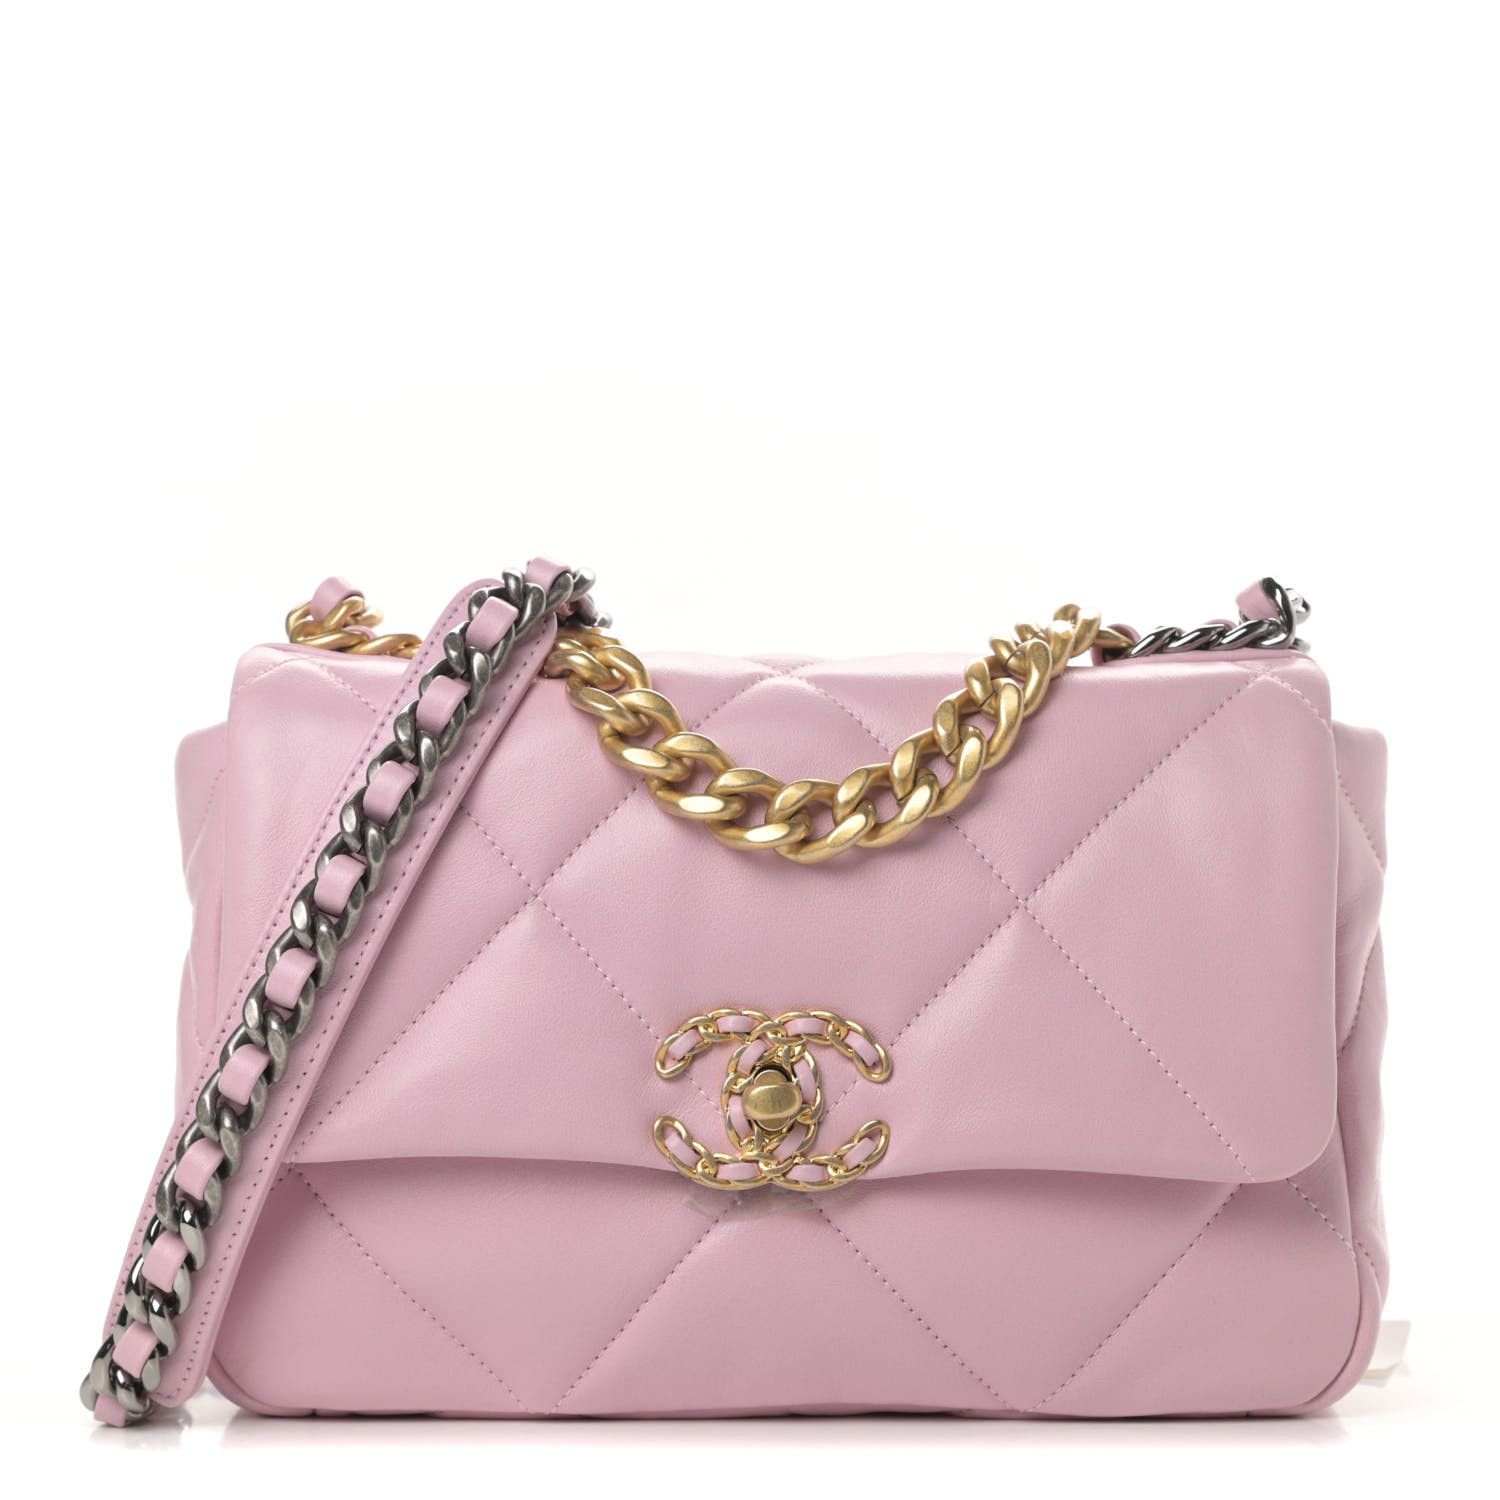 Lambskin Quilted Medium Chanel 19 Flap Light Pink | Fashionphile